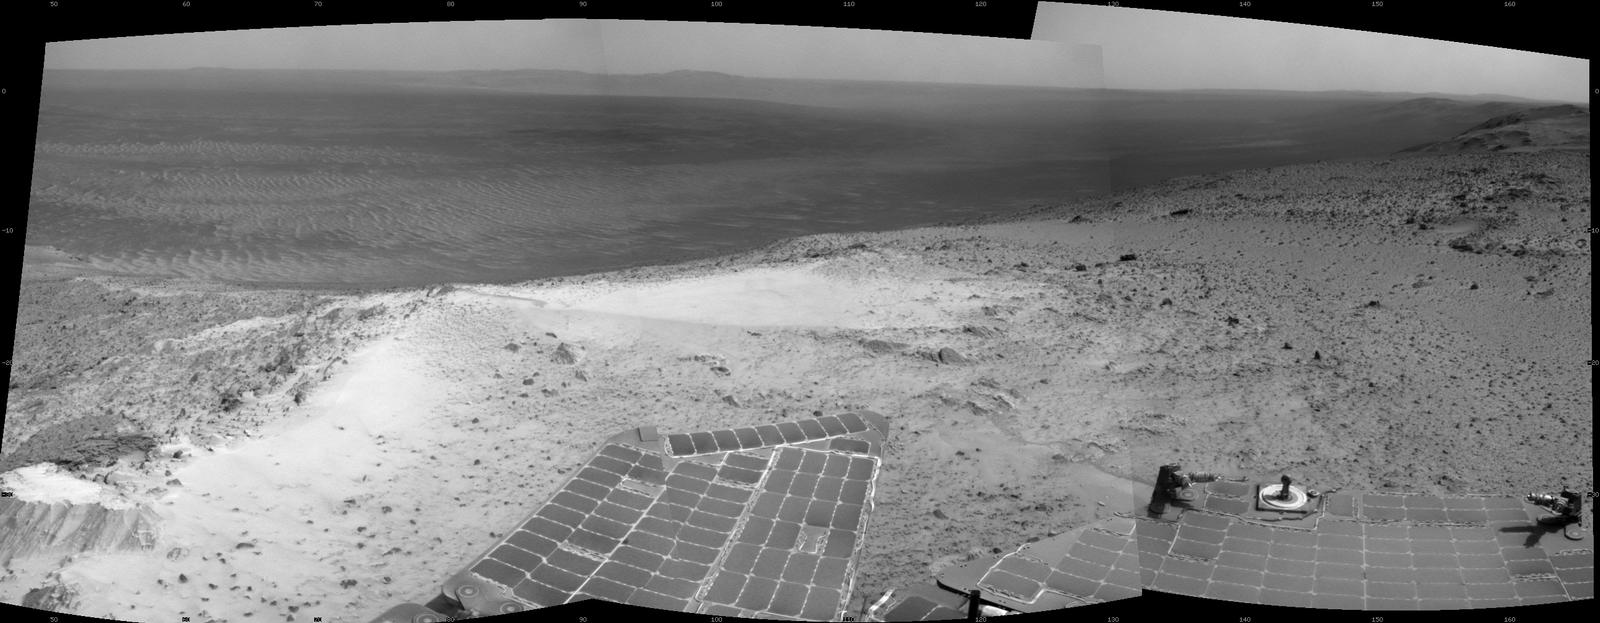 NASA's Mars Exploration Rover Opportunity recorded this view just after reaching the summit of "Cape Tribulation," on the western rim of Endeavour Crater, on Jan. 6, 2015, the 3,894th Martian day, or sol, of the rover's work on Mars.